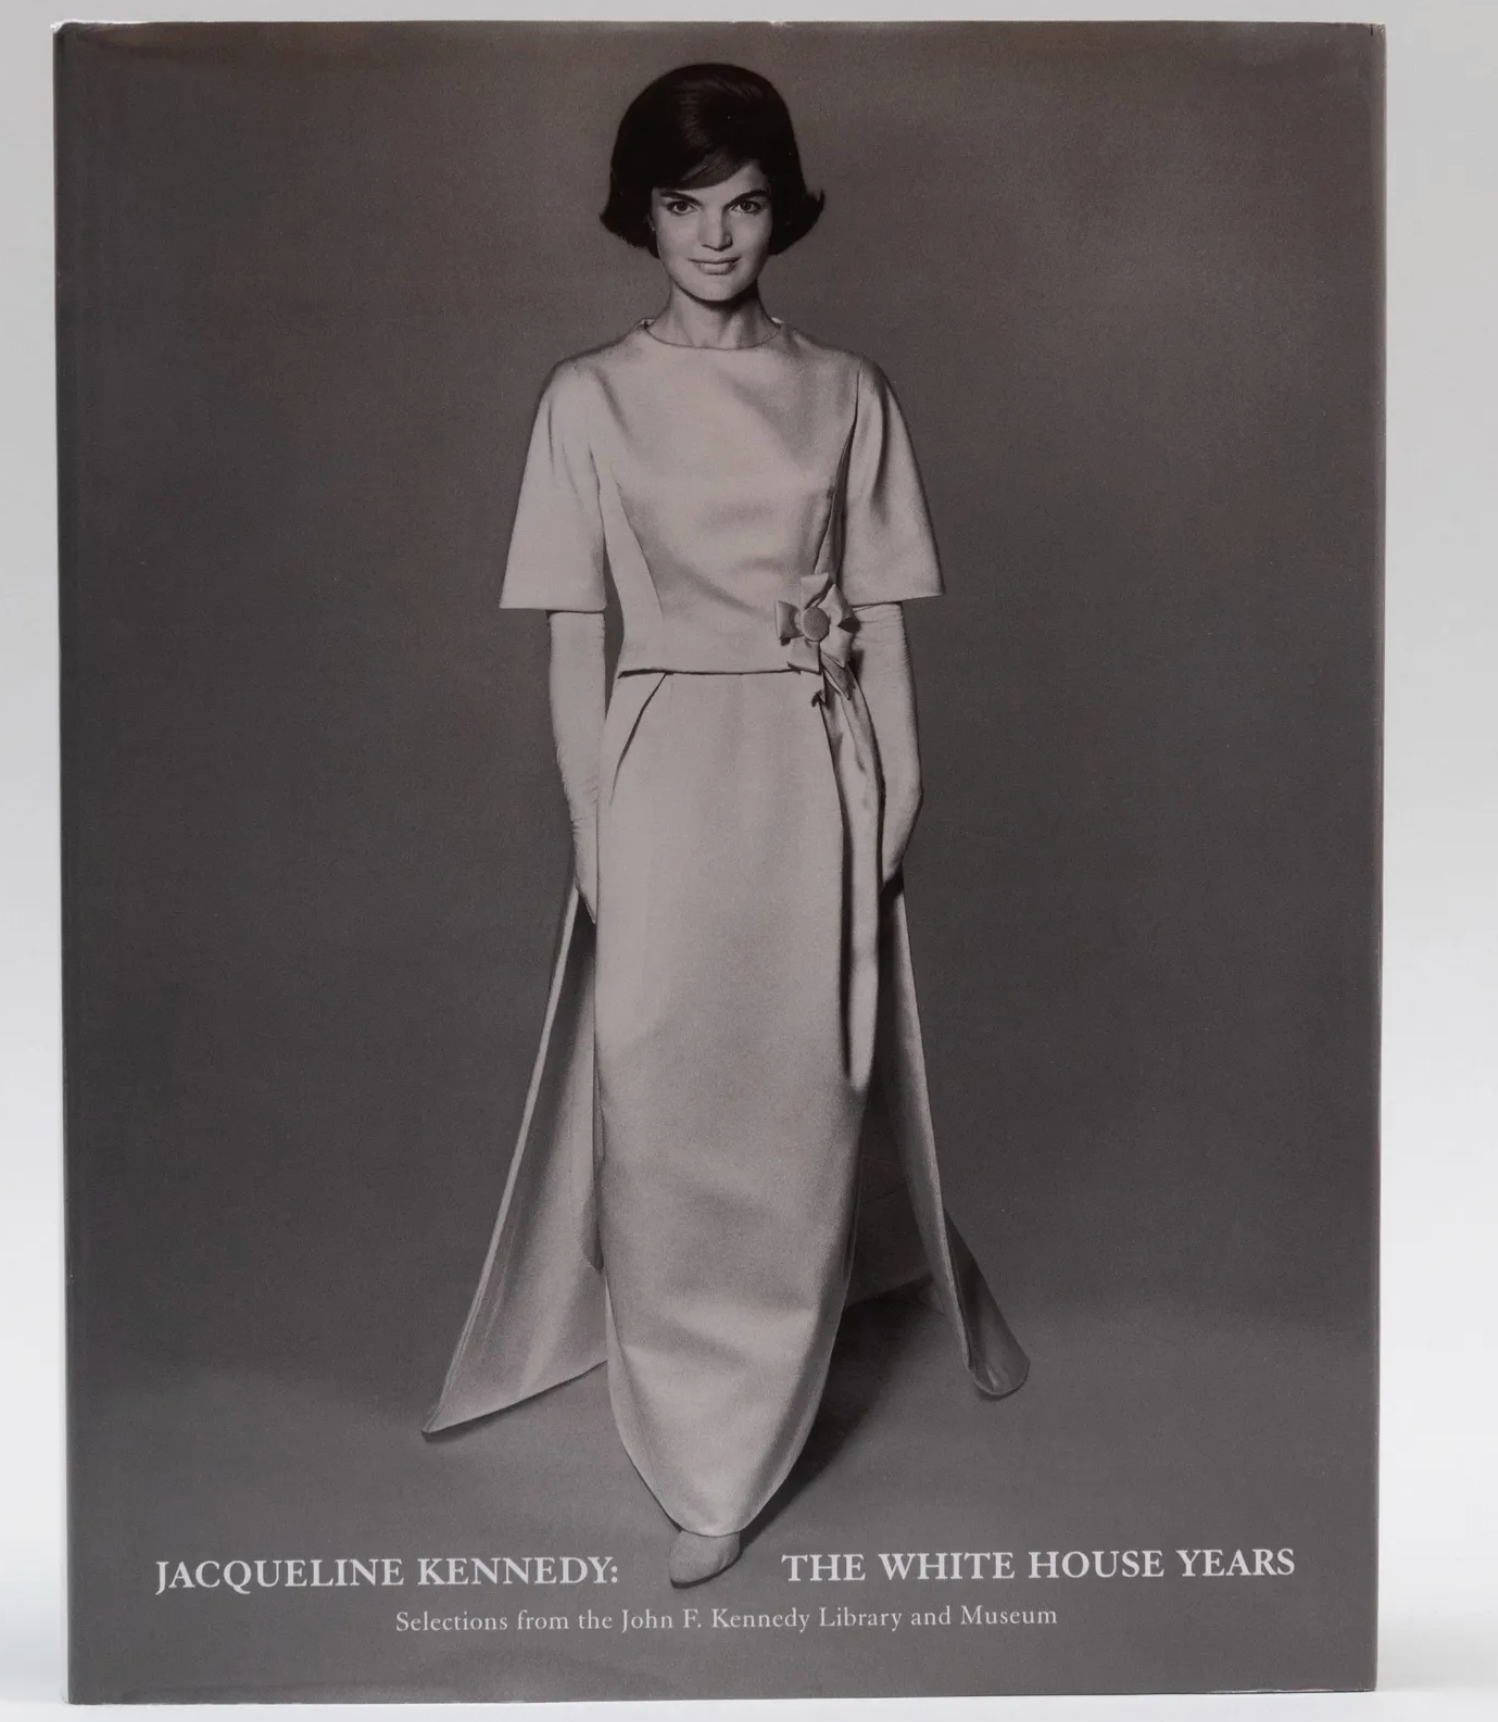 Jacqueline Kennedy: The White House Years - INSCRIBED to Paul Newman and Joanne Woodward